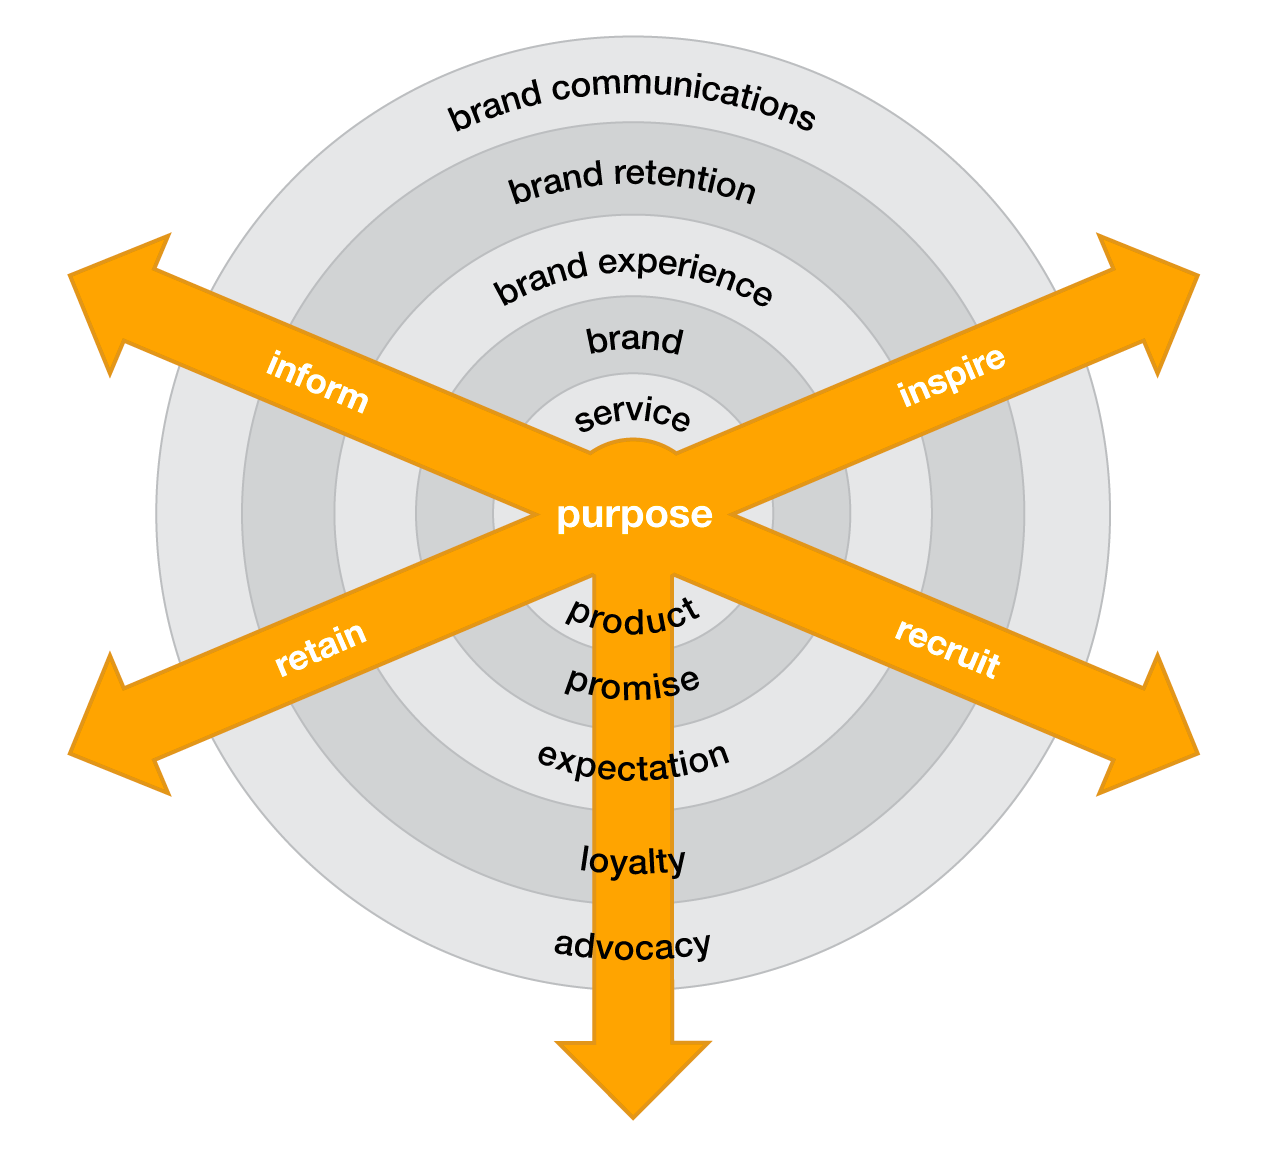 Depiction of inside-out branding where purpose is used to inform, inspire, recruit and retain.